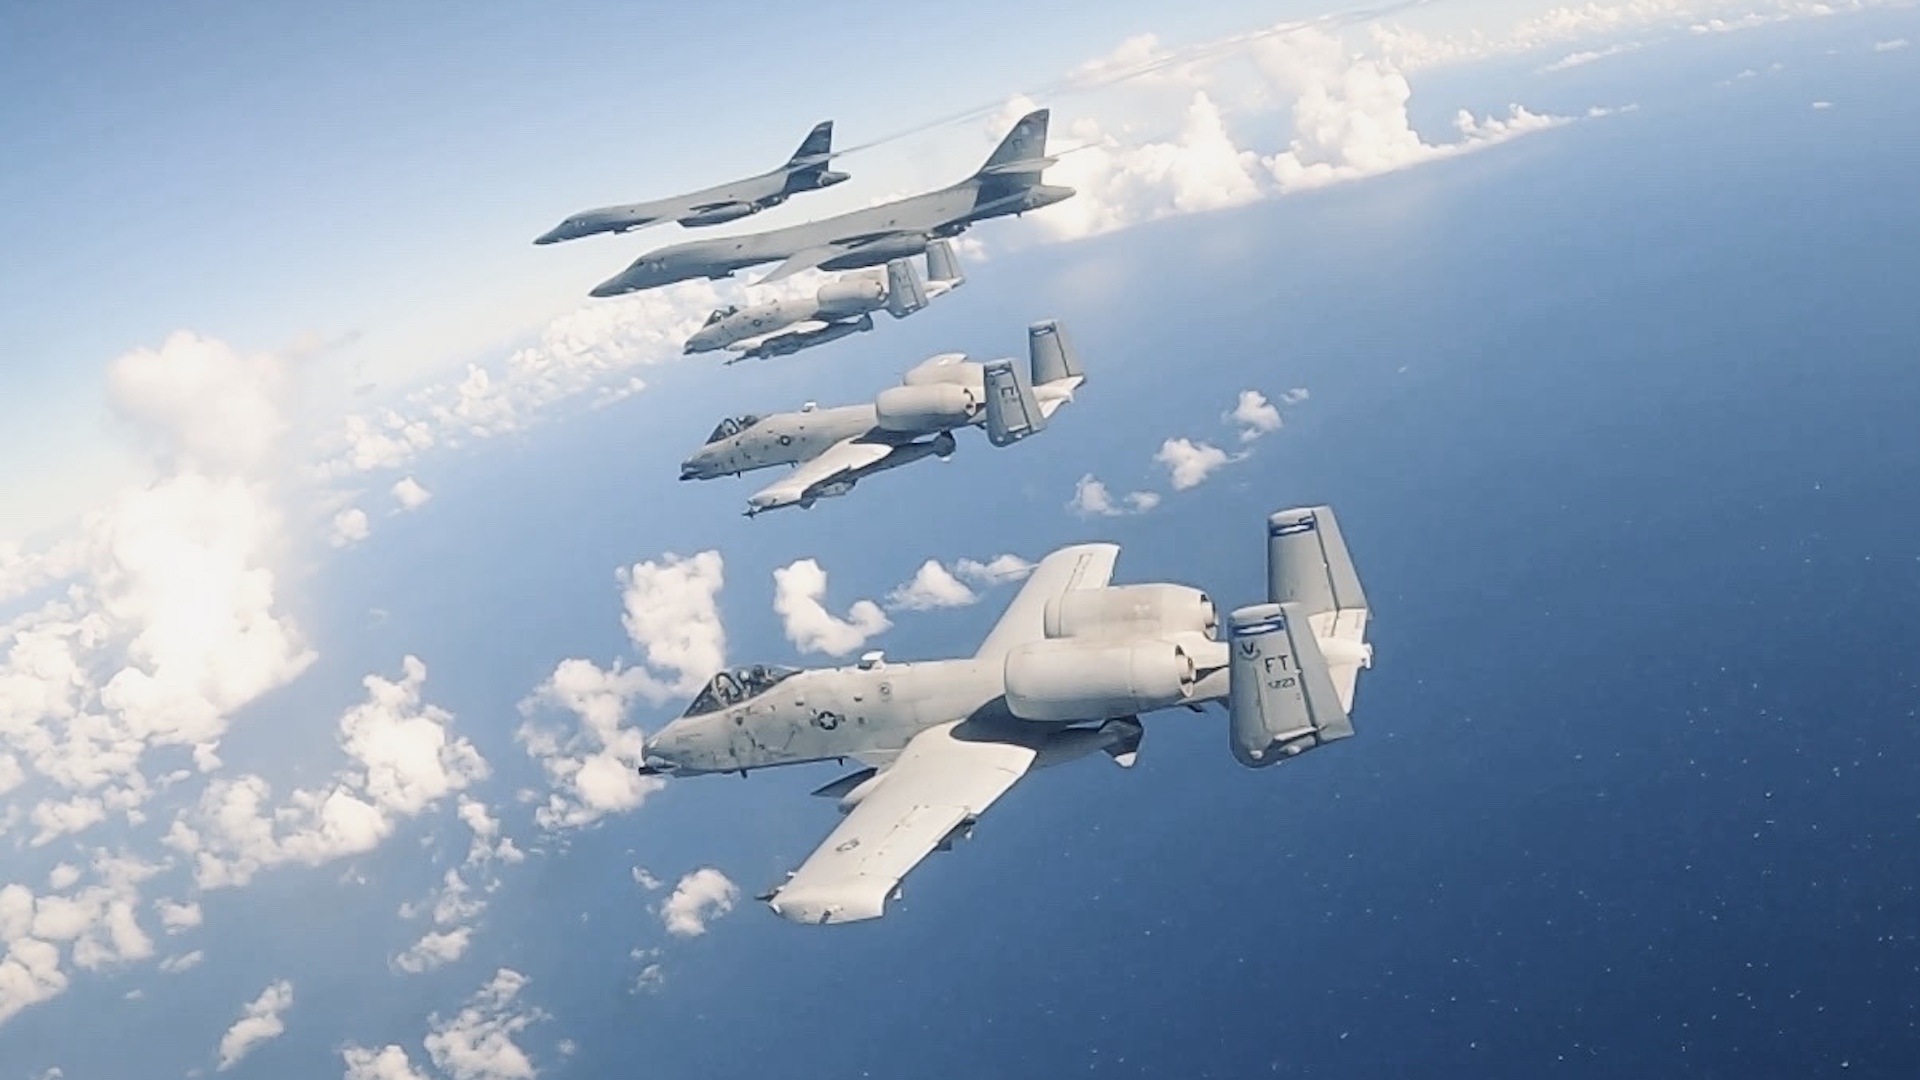 Old Air Force A-10 Warthog learns new trick: Covering fire for B-1B bombers